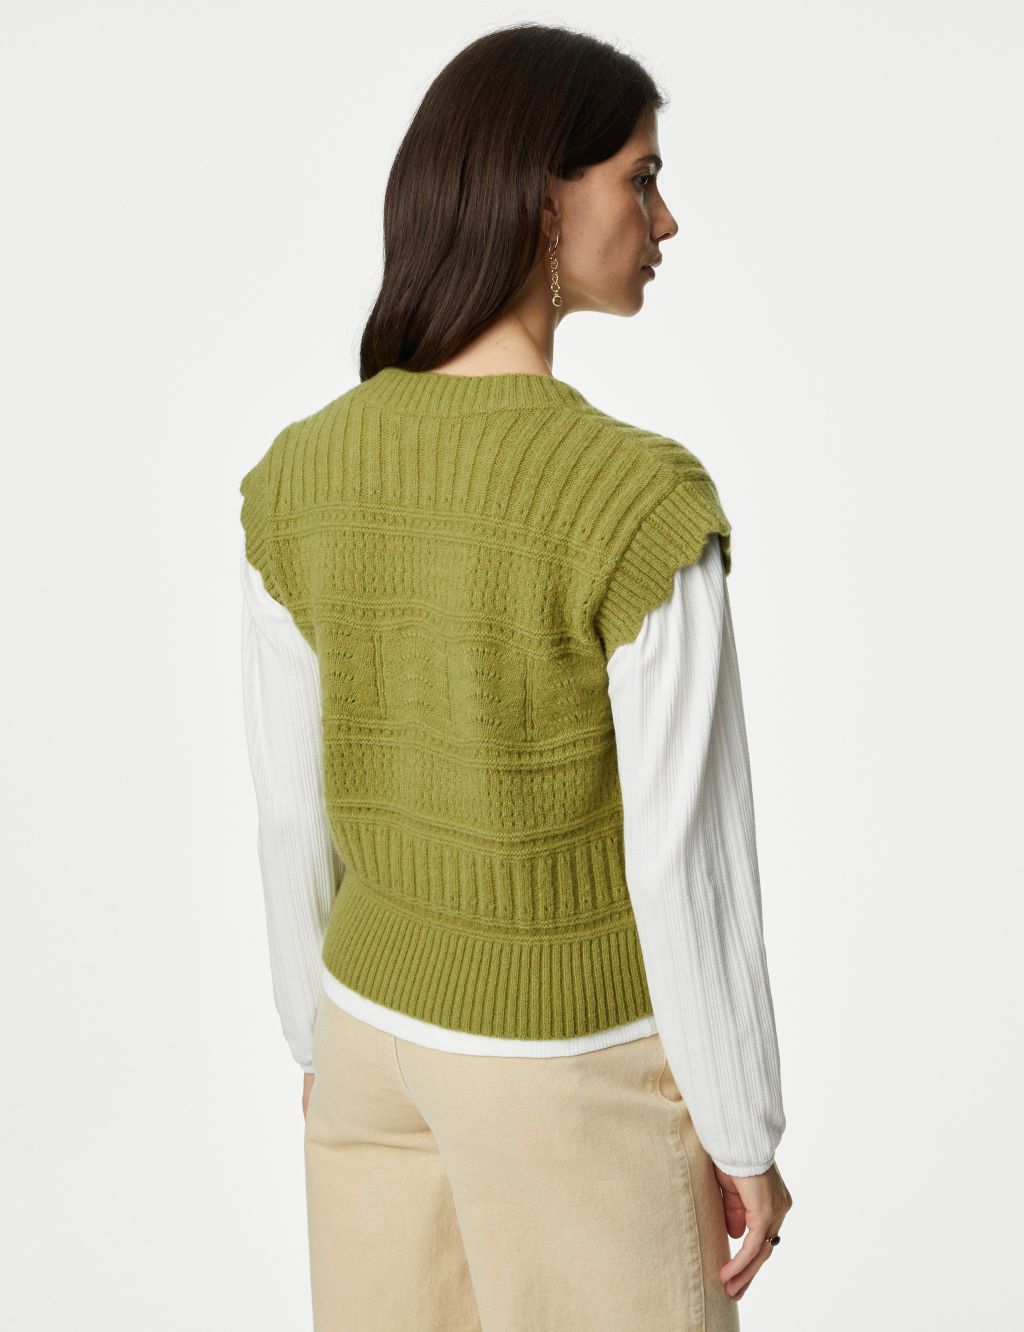 Notch Neck Knitted Vest with Wool image 5